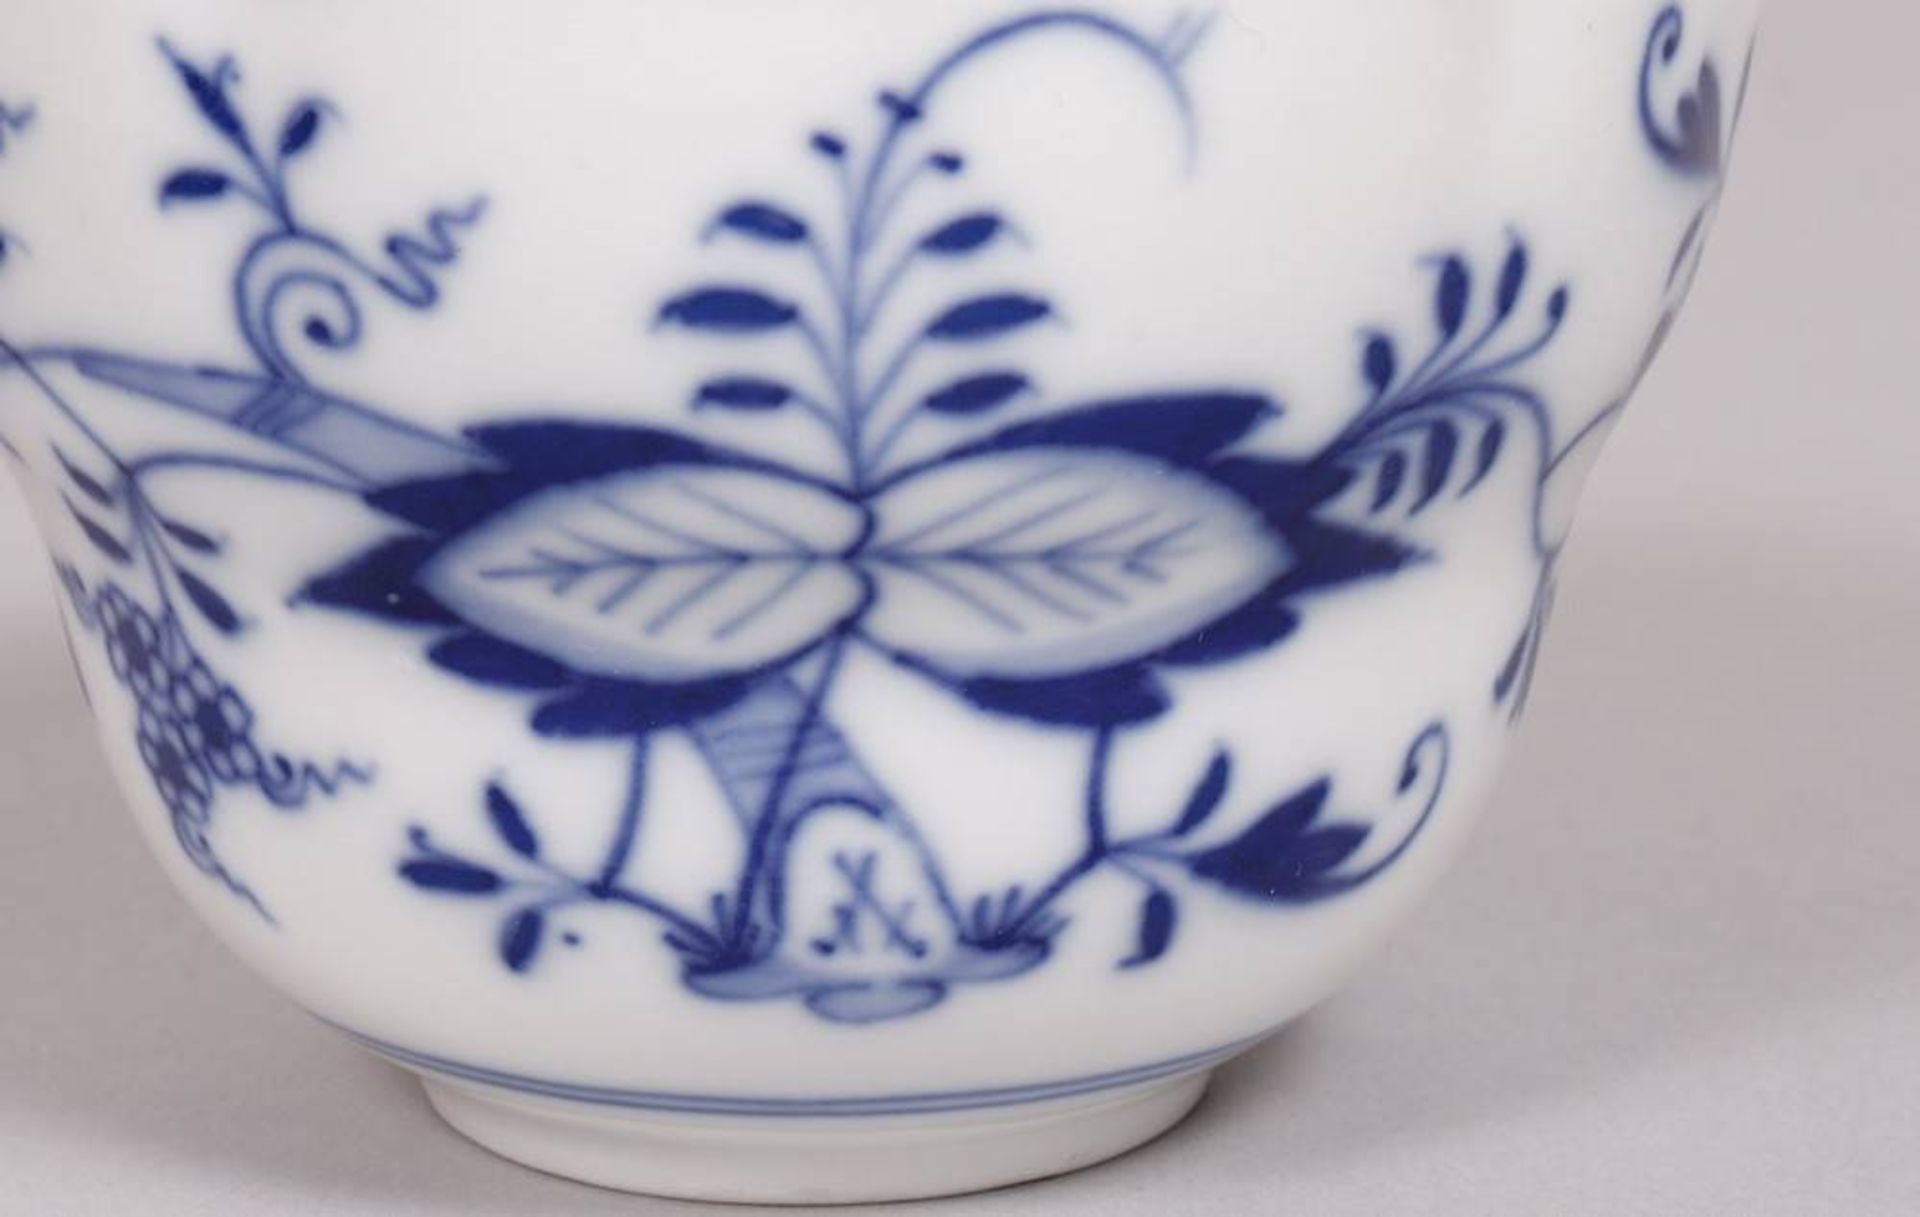 4 cups and saucers, Meissen, c. 1900 - Image 6 of 8